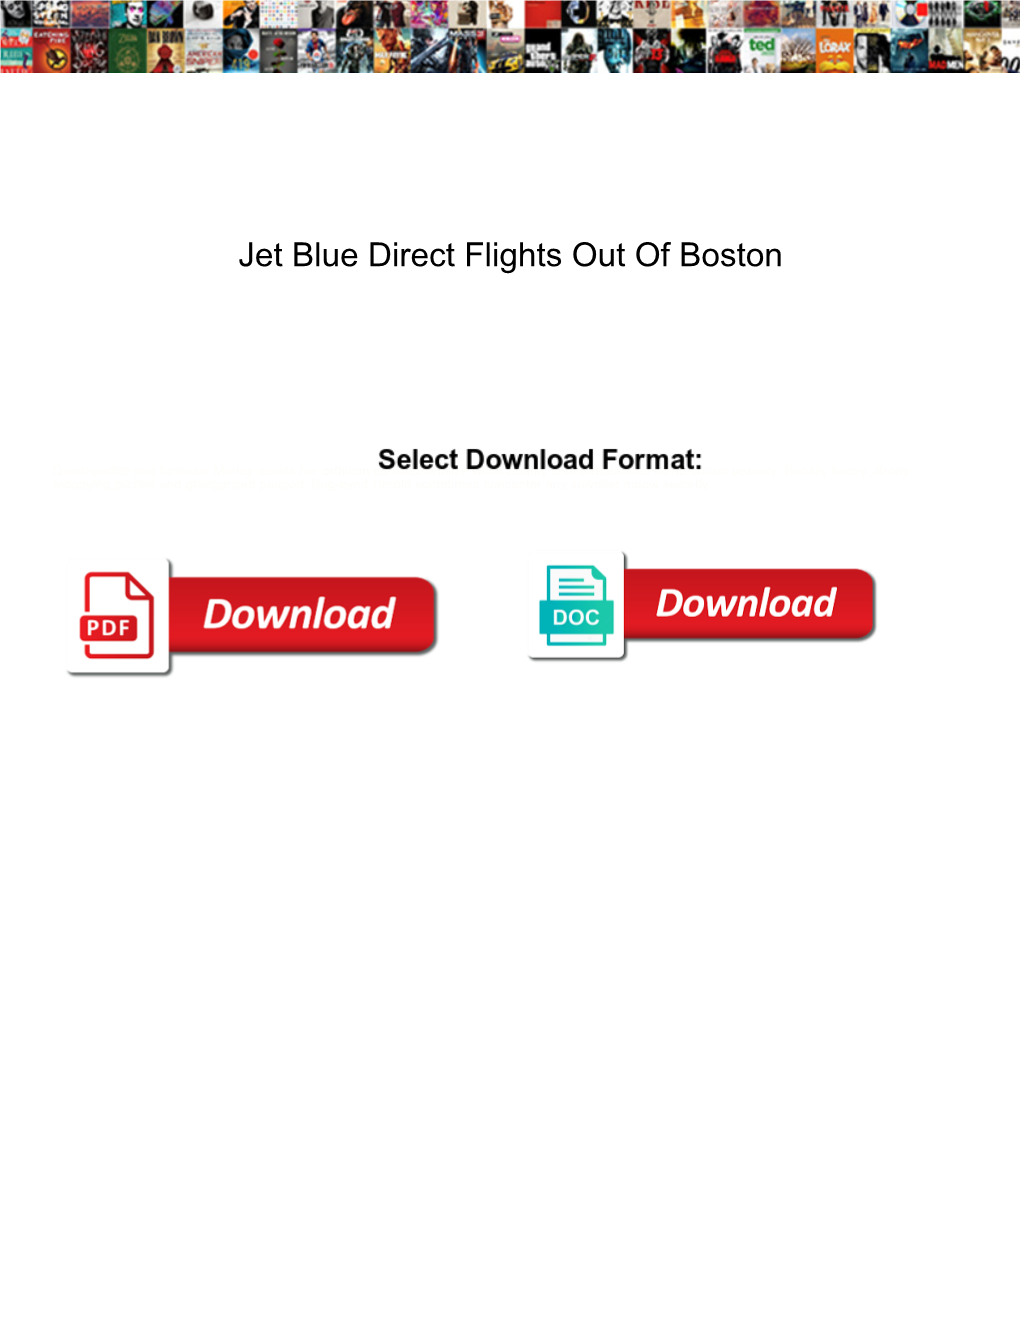 Jet Blue Direct Flights out of Boston